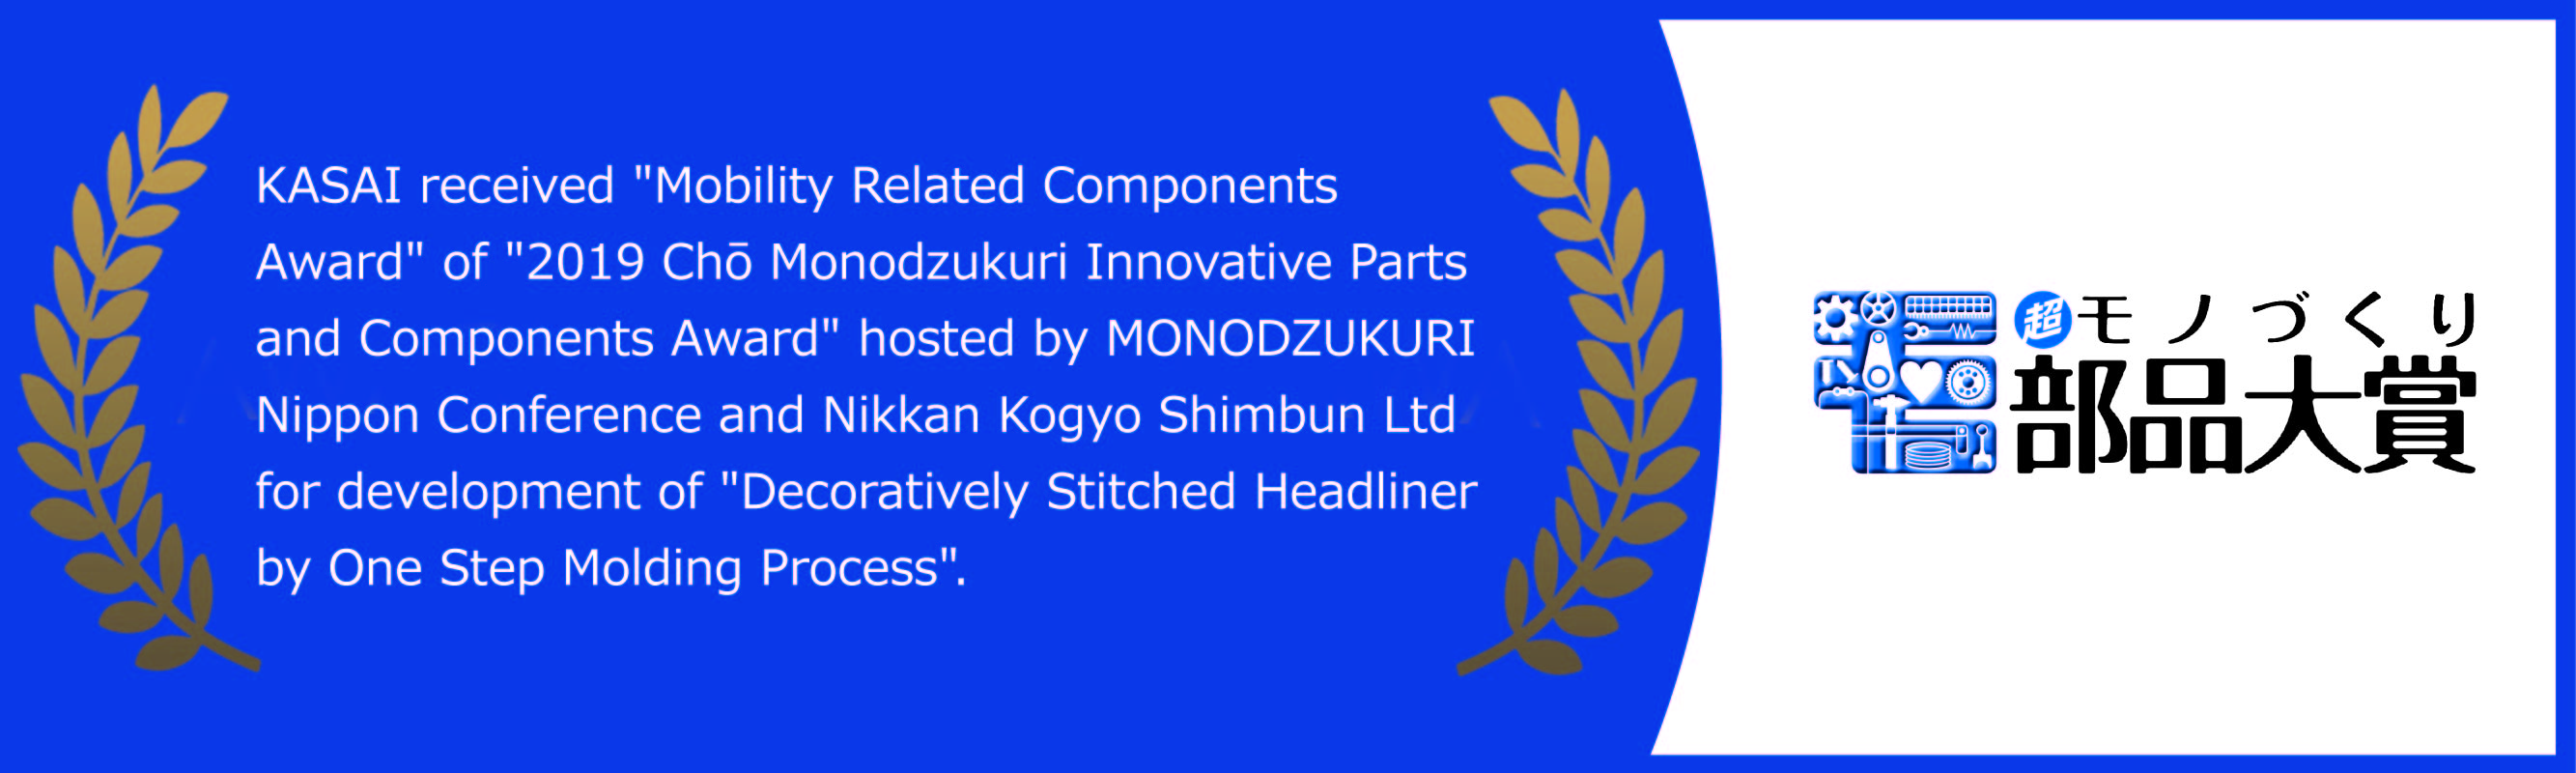 KASAI received 'Mobility Related Components Award' of '2019 Chō Monodzukuri Innovative Parts and Components Award' hosted by MONODZUKURI Nippon Conference and Nikkan Kogyo Shimbun Ltd for development of 'Decoratively Stitched Headliner by One Step Molding Process'.